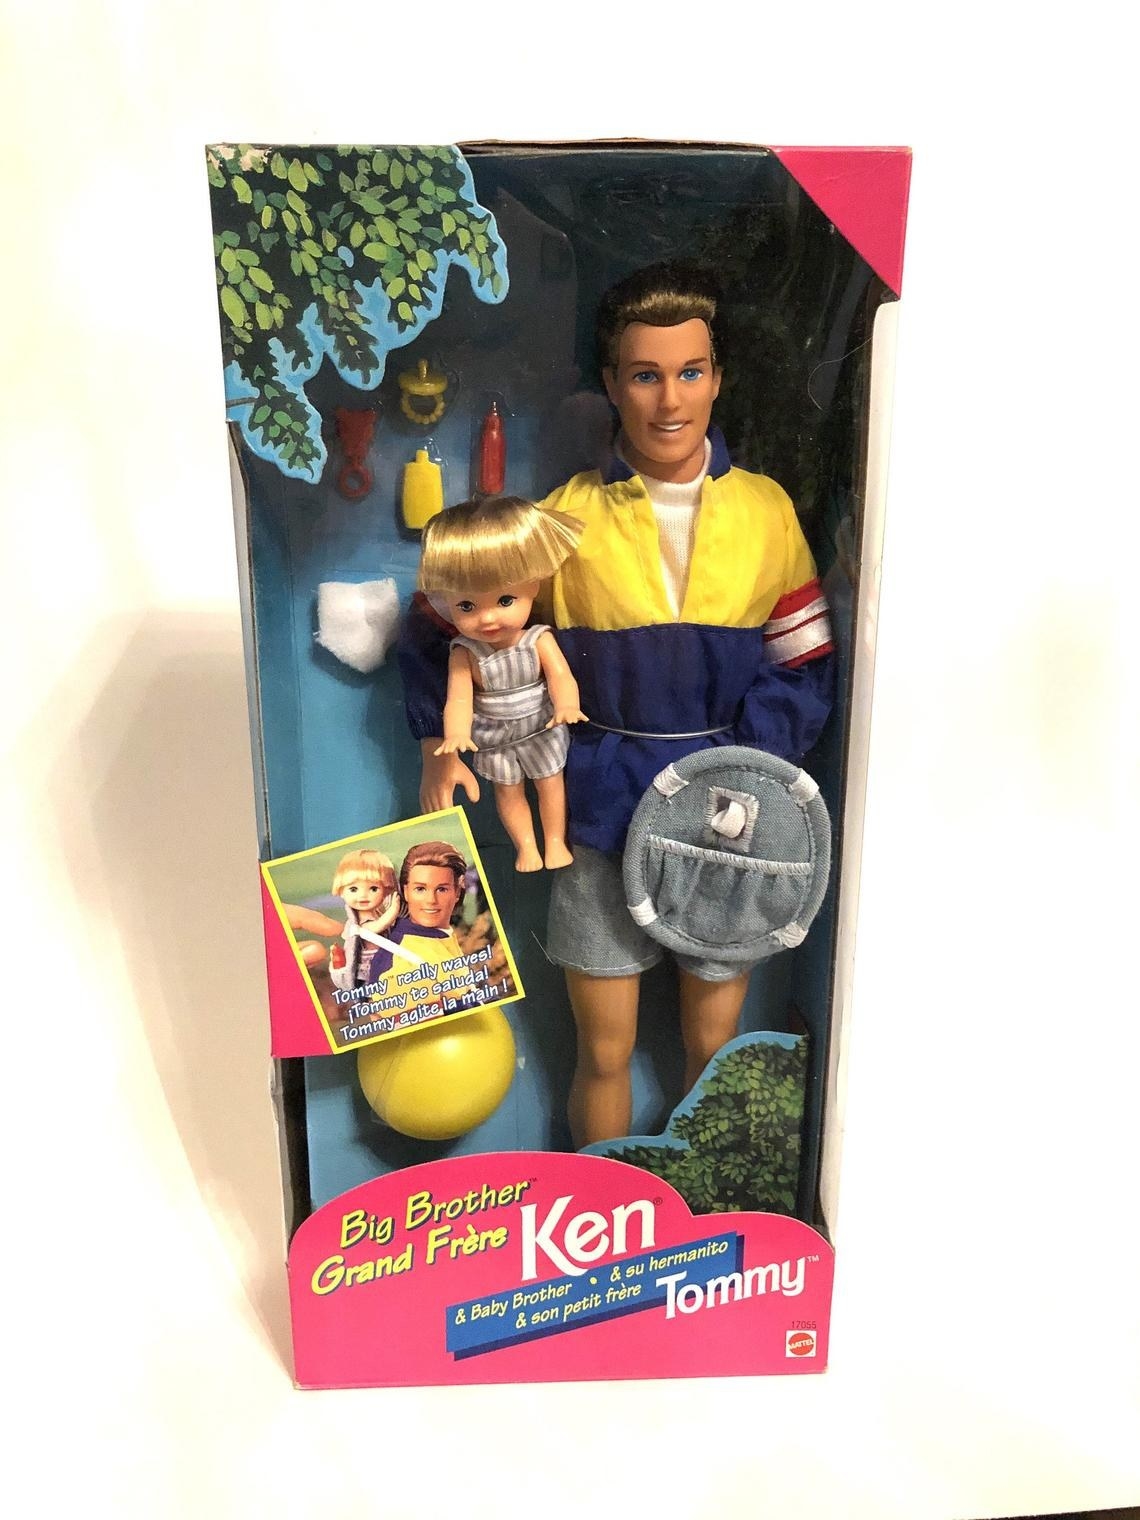 A Big Brother Ken doll with Tommy still in the box